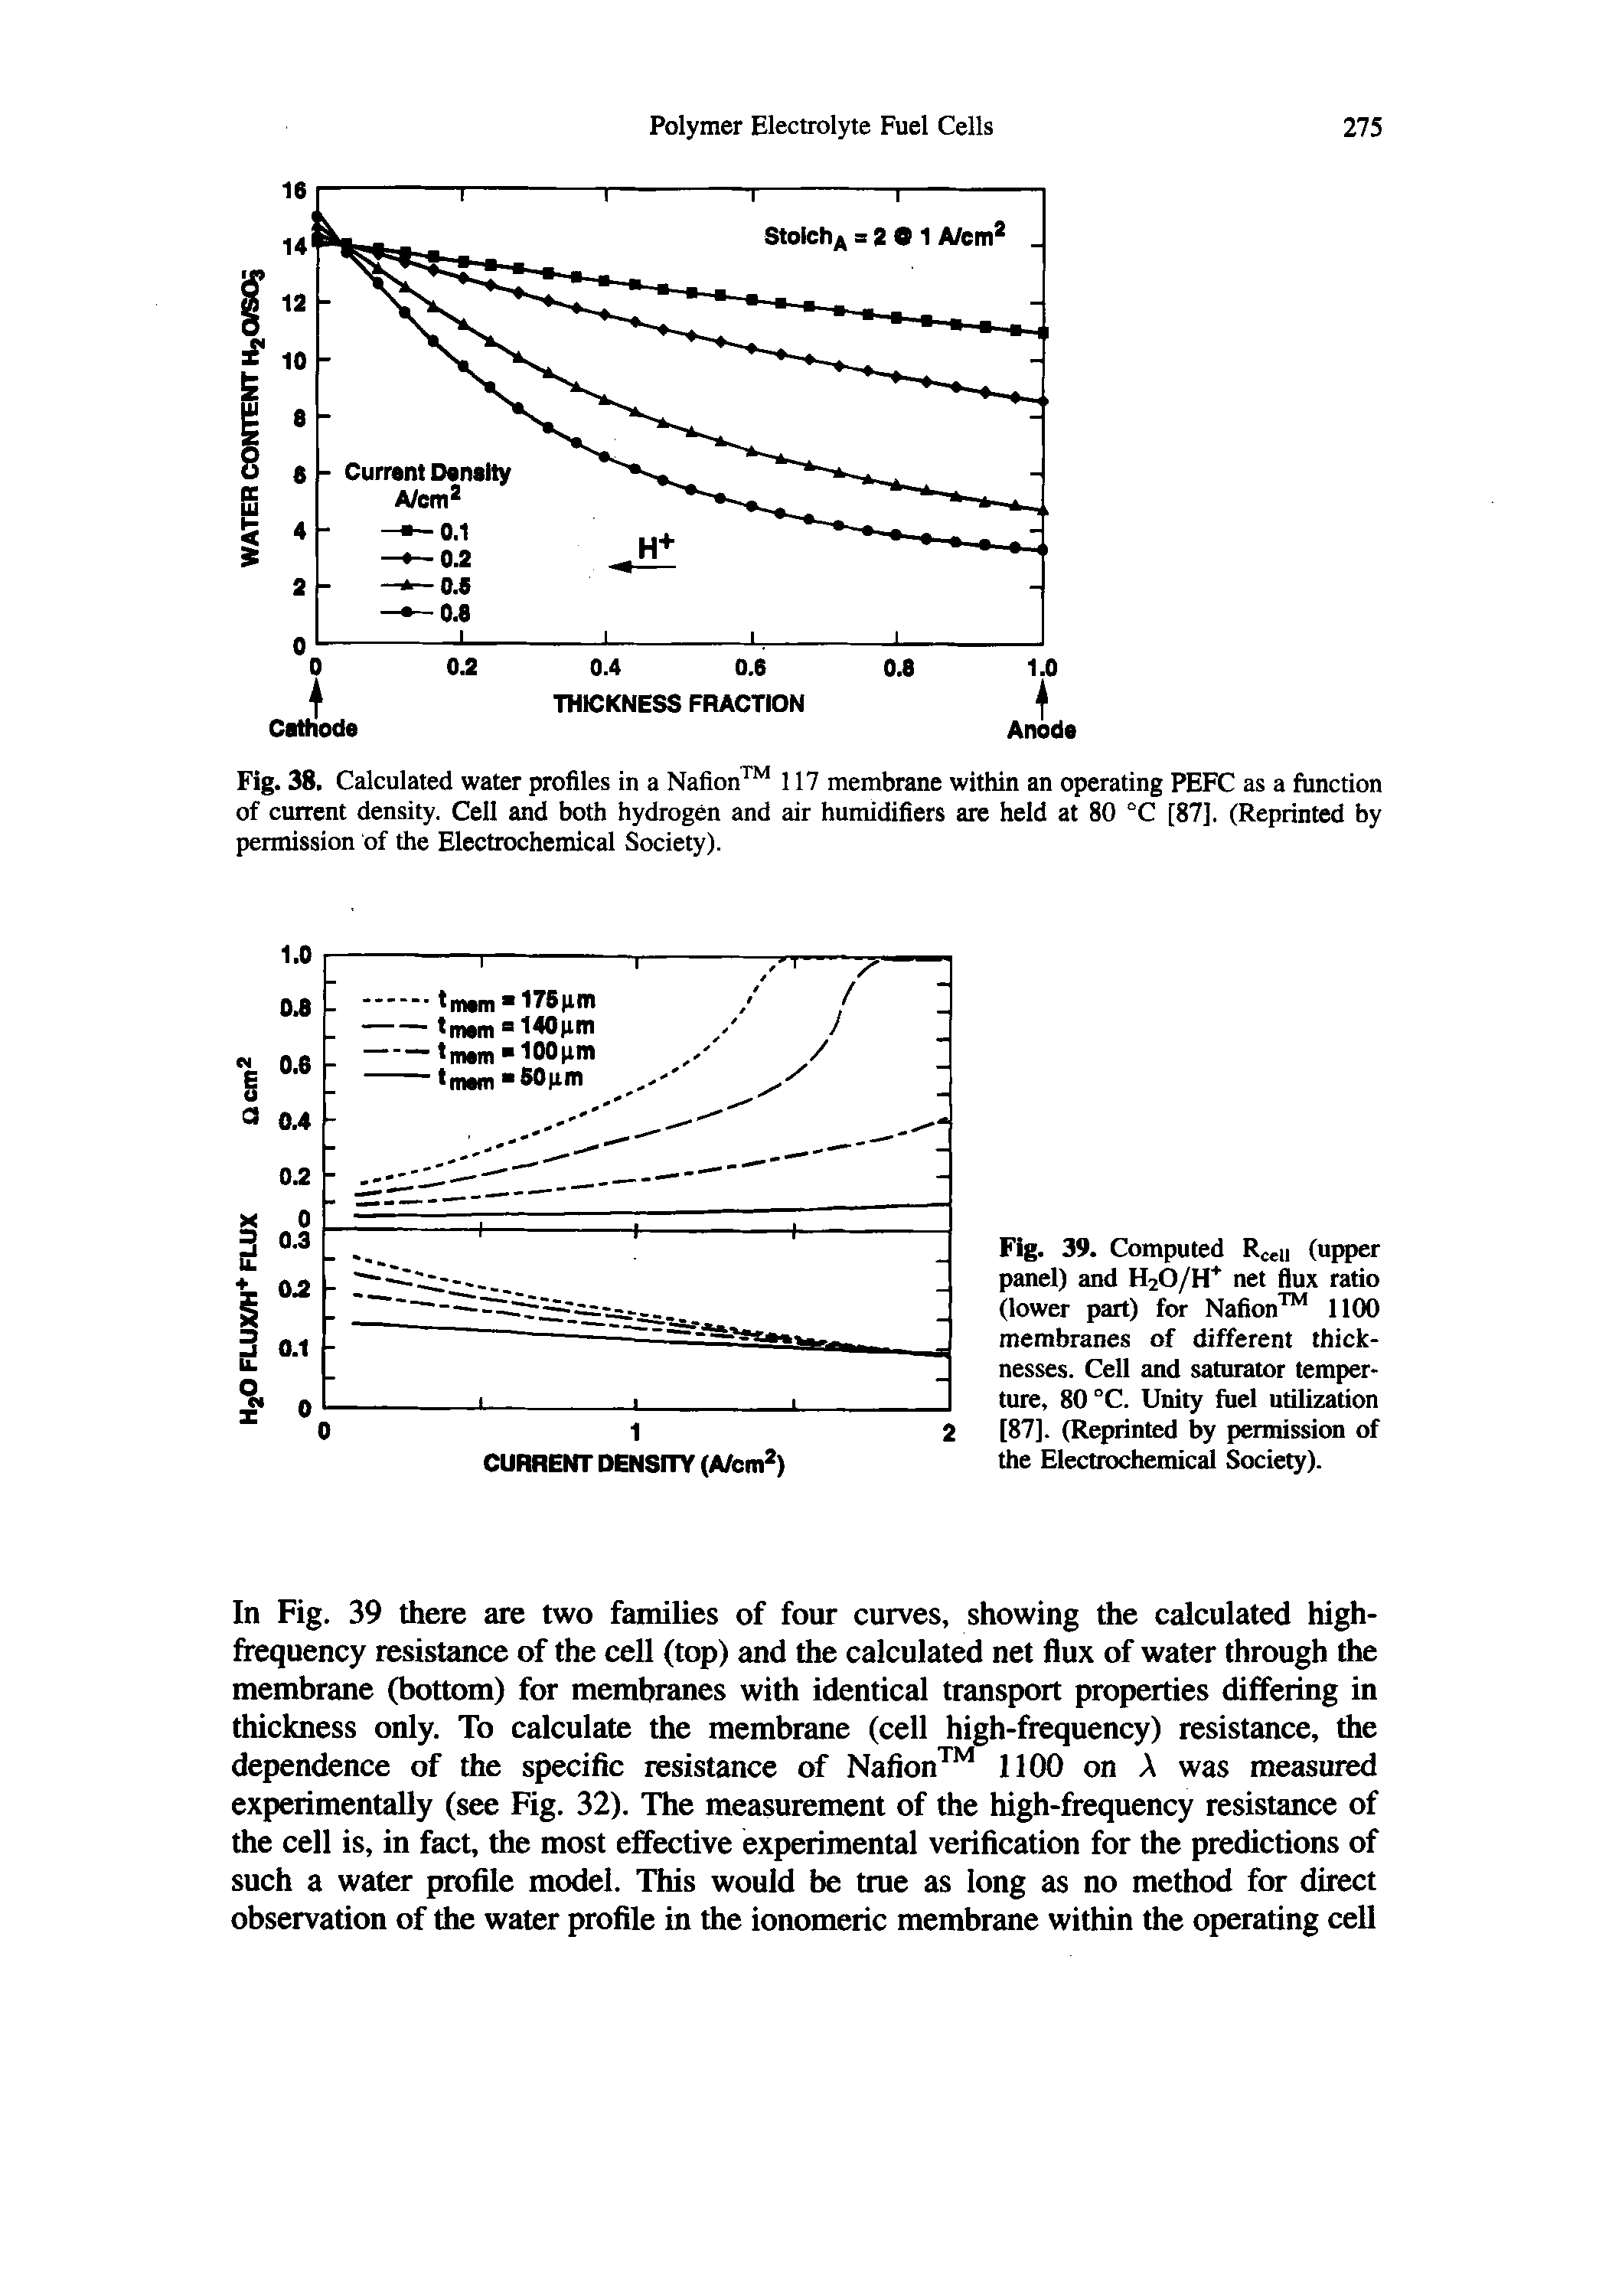 Fig. 38. Calculated water profiles in a Nafion 117 membrane within an operating PEFC as a function of current density. Cell and both hydrogen and air humidifiers are held at 80 °C [87], (Reprinted by permission of the Electrochemical Society).